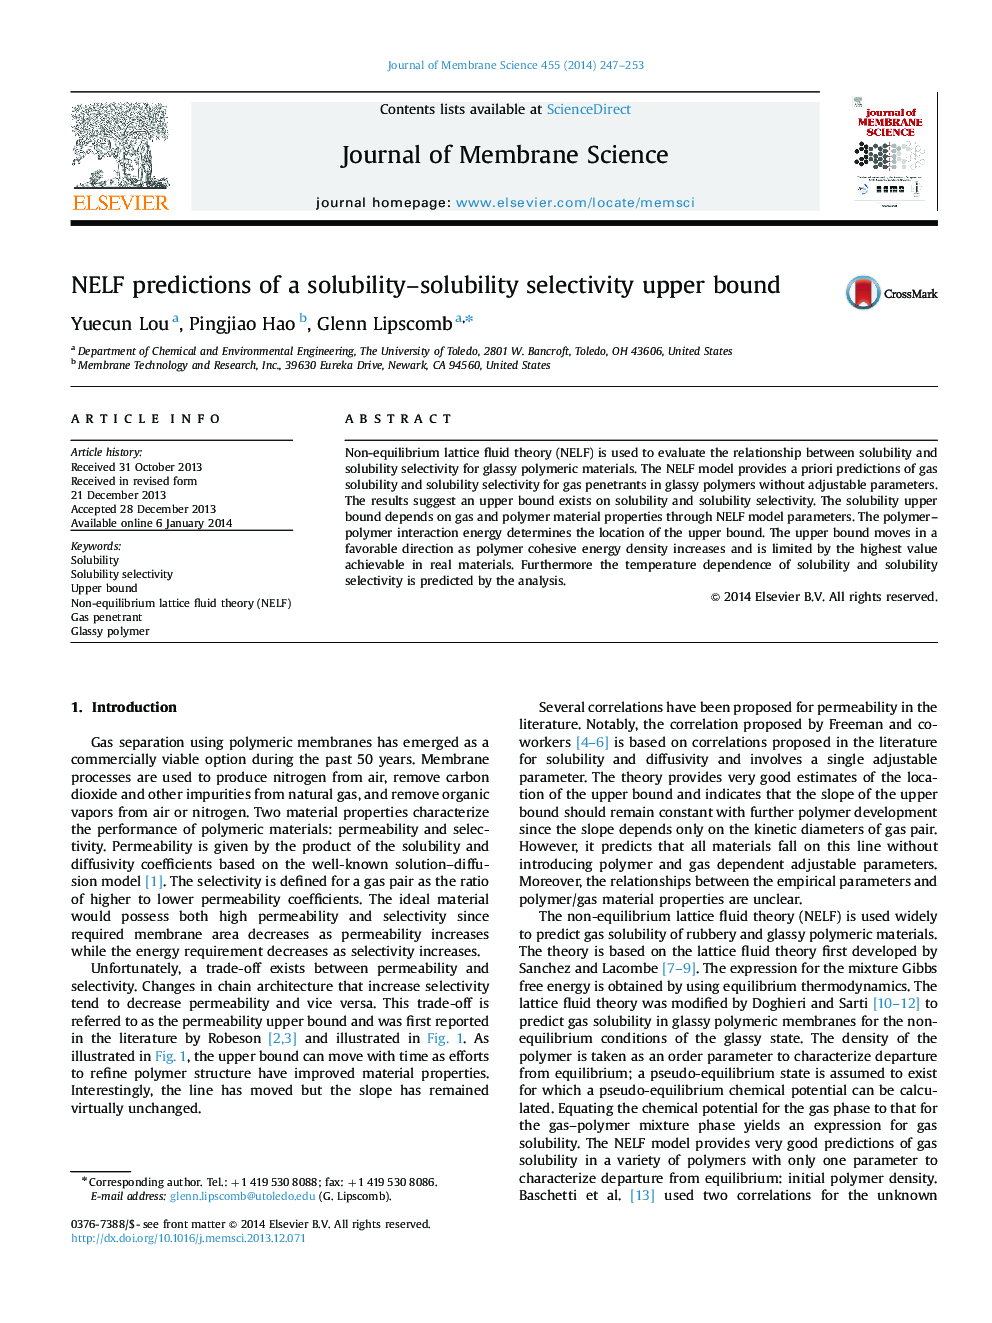 NELF predictions of a solubility–solubility selectivity upper bound